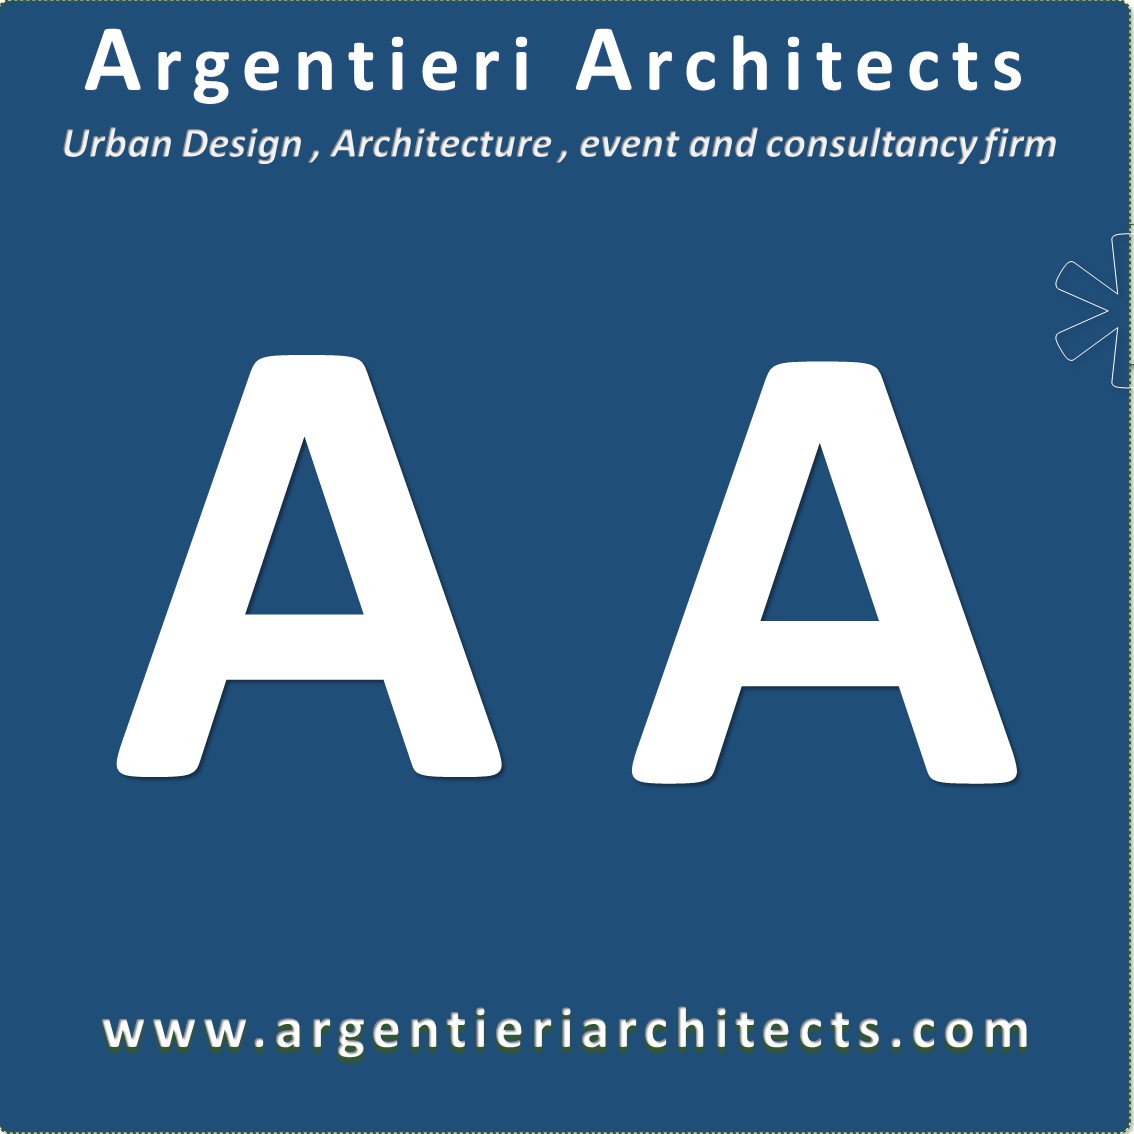 intro- Argentieri Architects is an innovation and design firm. International expert on urban strategies & development, Smart Cities, architecture , retail and hospitality  